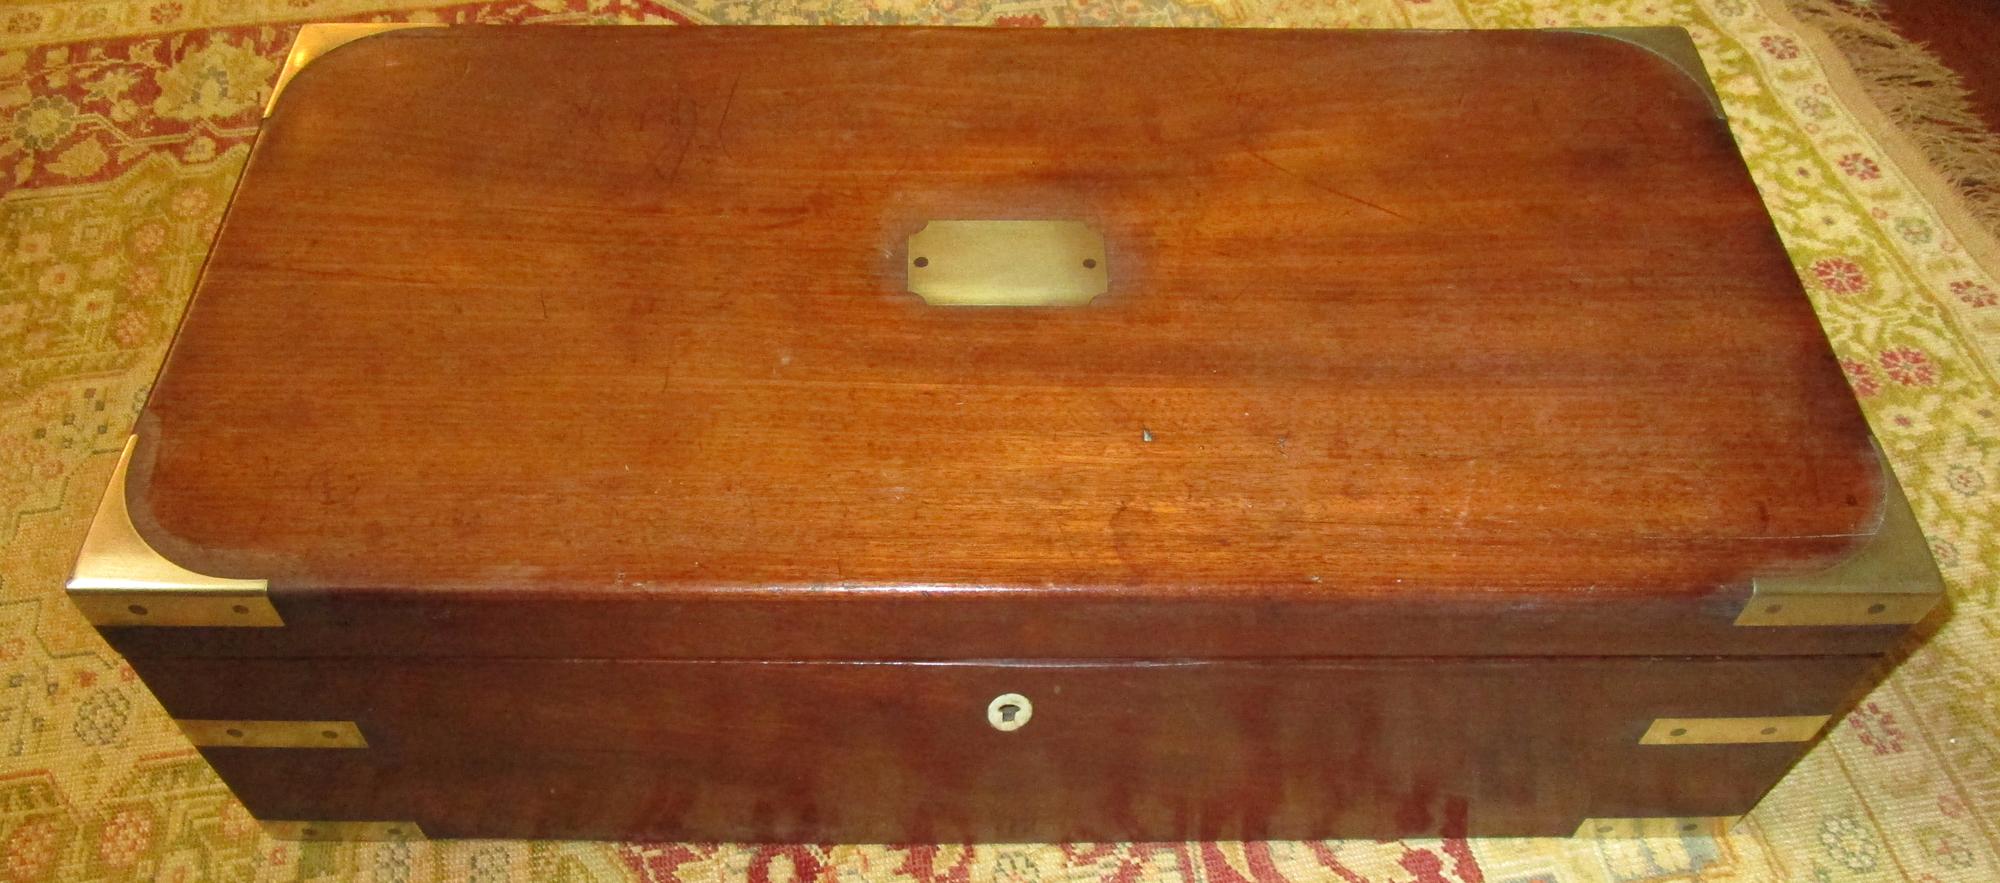 English Regency walnut travelling sloped lap desk box with brass corner mounts and retractable handles. Bone escutcheon lock (no key.) Other features include Fine tooled leather insert and a secret spring loaded compartment inside -see last two